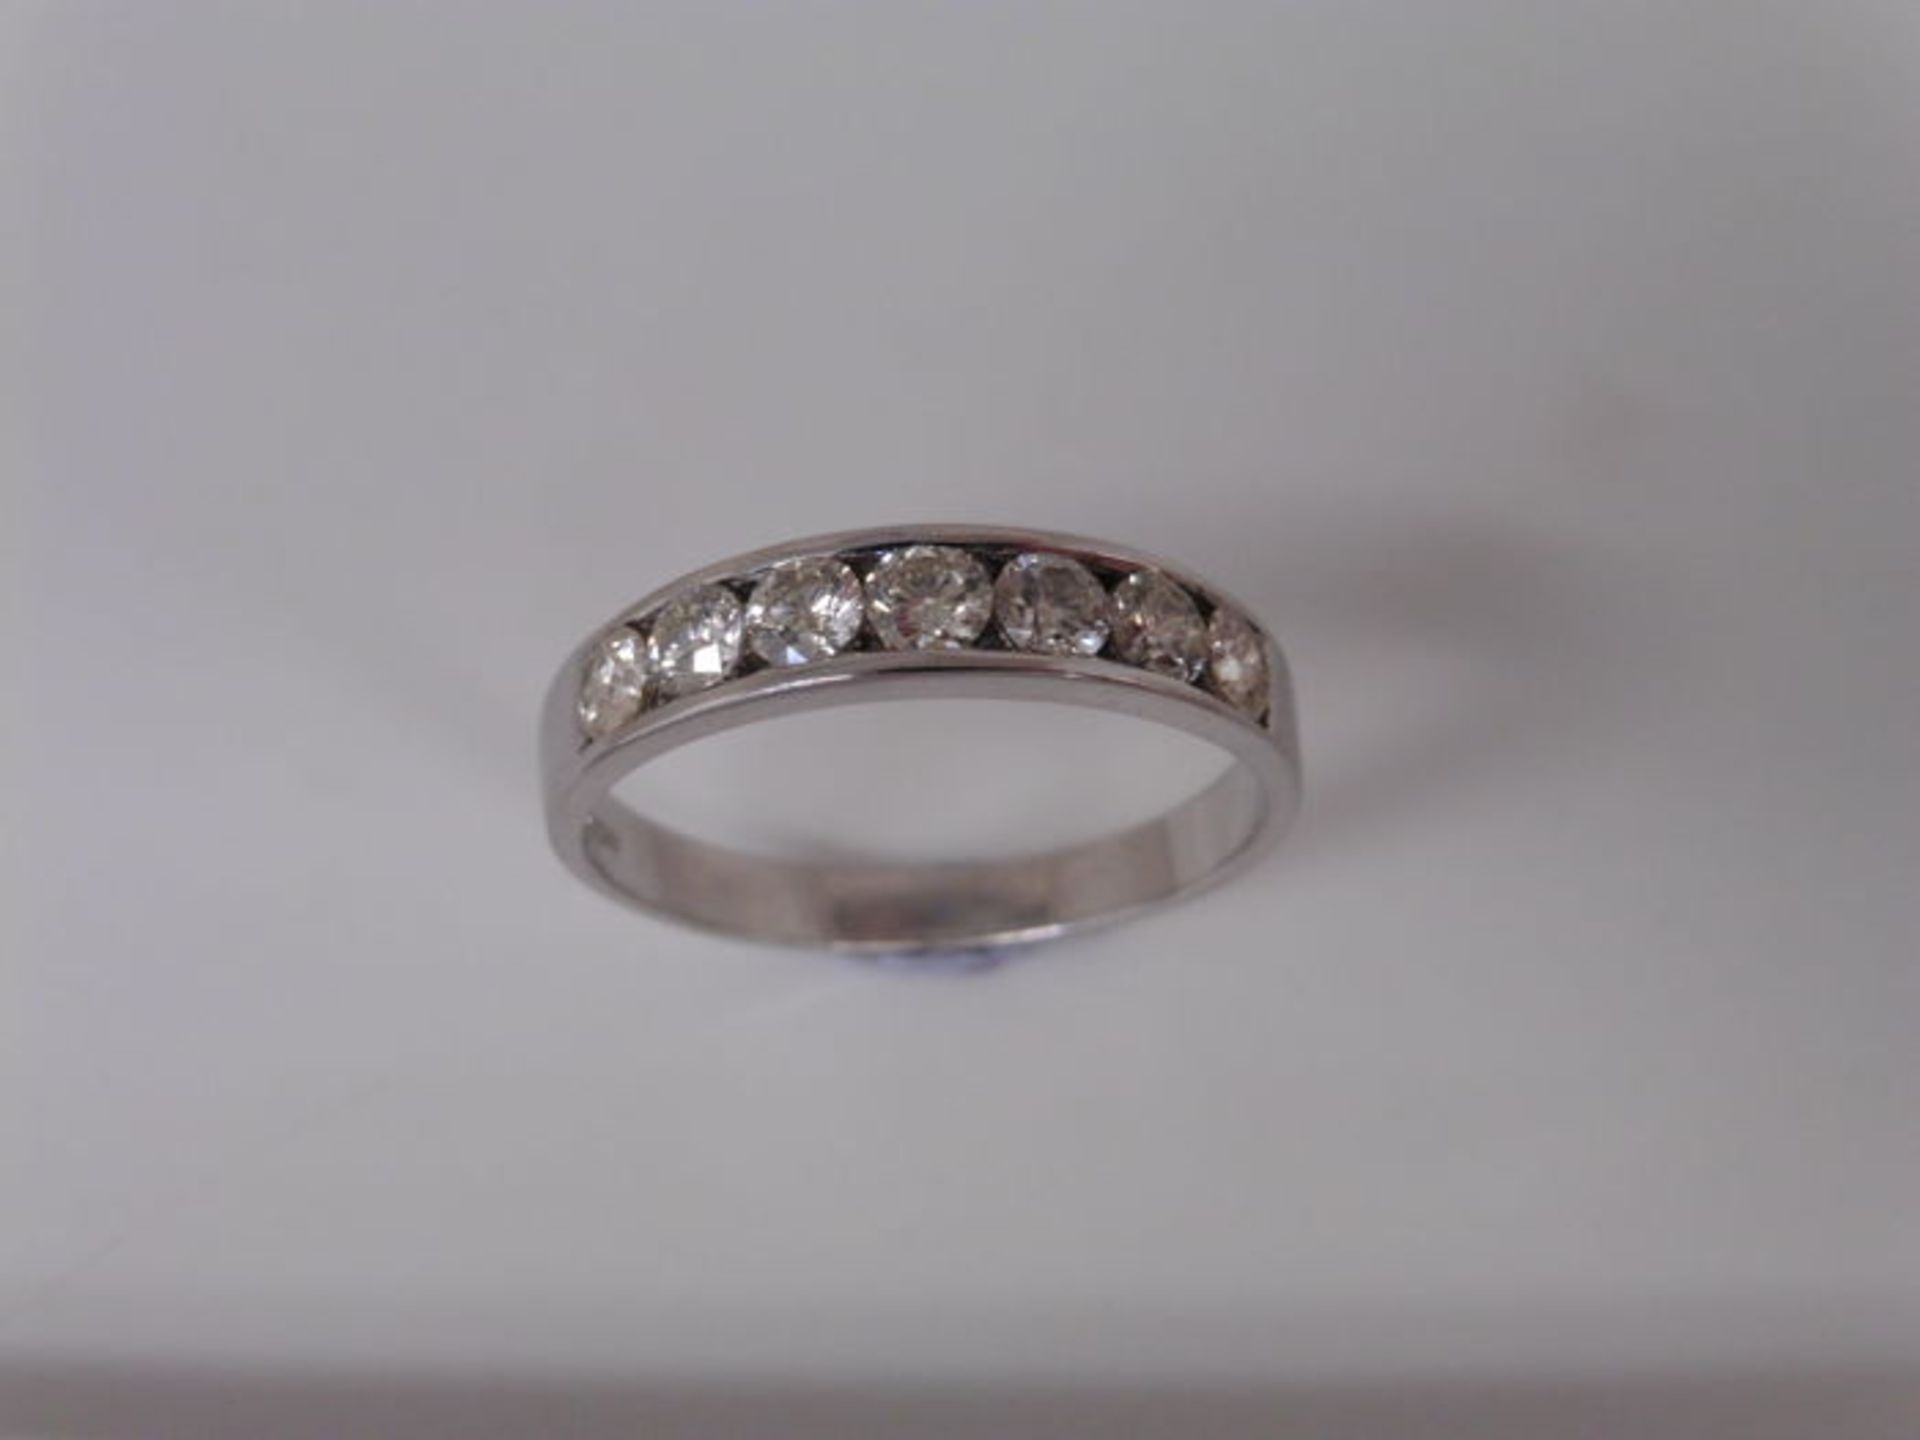 0.70ct diamond band ring set with 7 brilliant cut diamonds in a channel setting. H/I colour and - Image 3 of 4